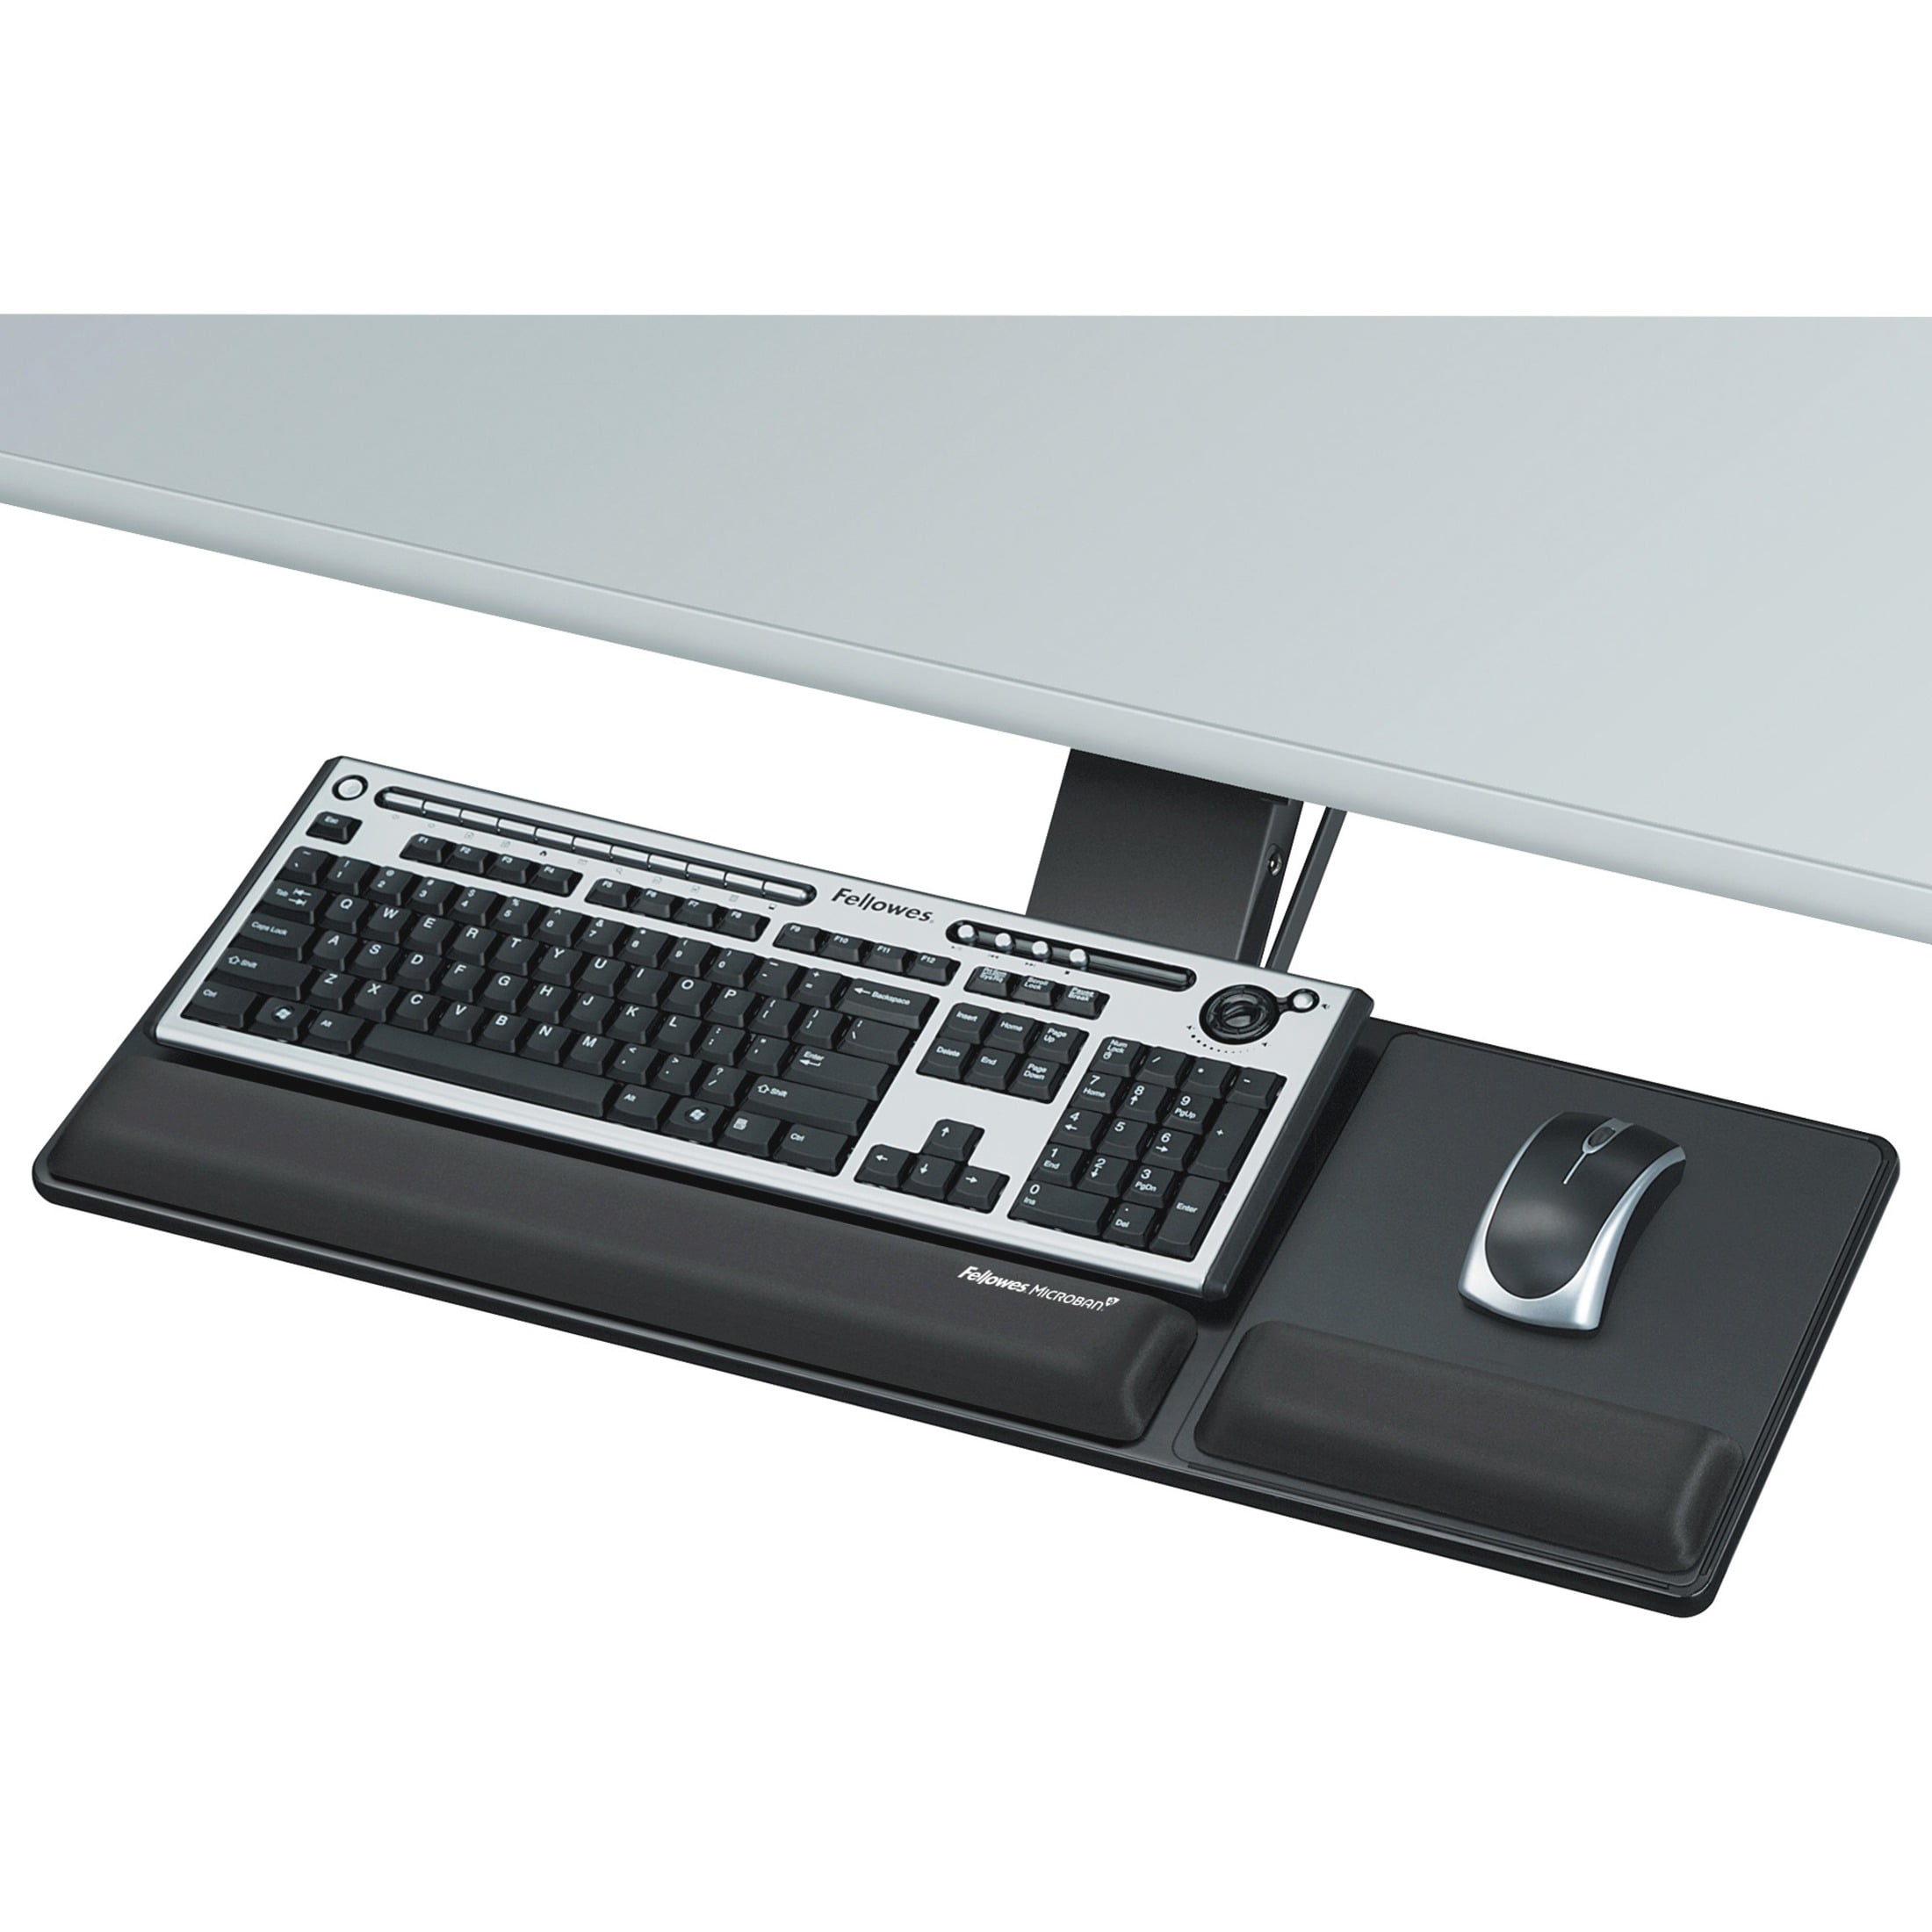 12.5 x 30 Inches Platinum 9651-32 Buddy Products Articulating Keyboard Drawer with Mouse Platform